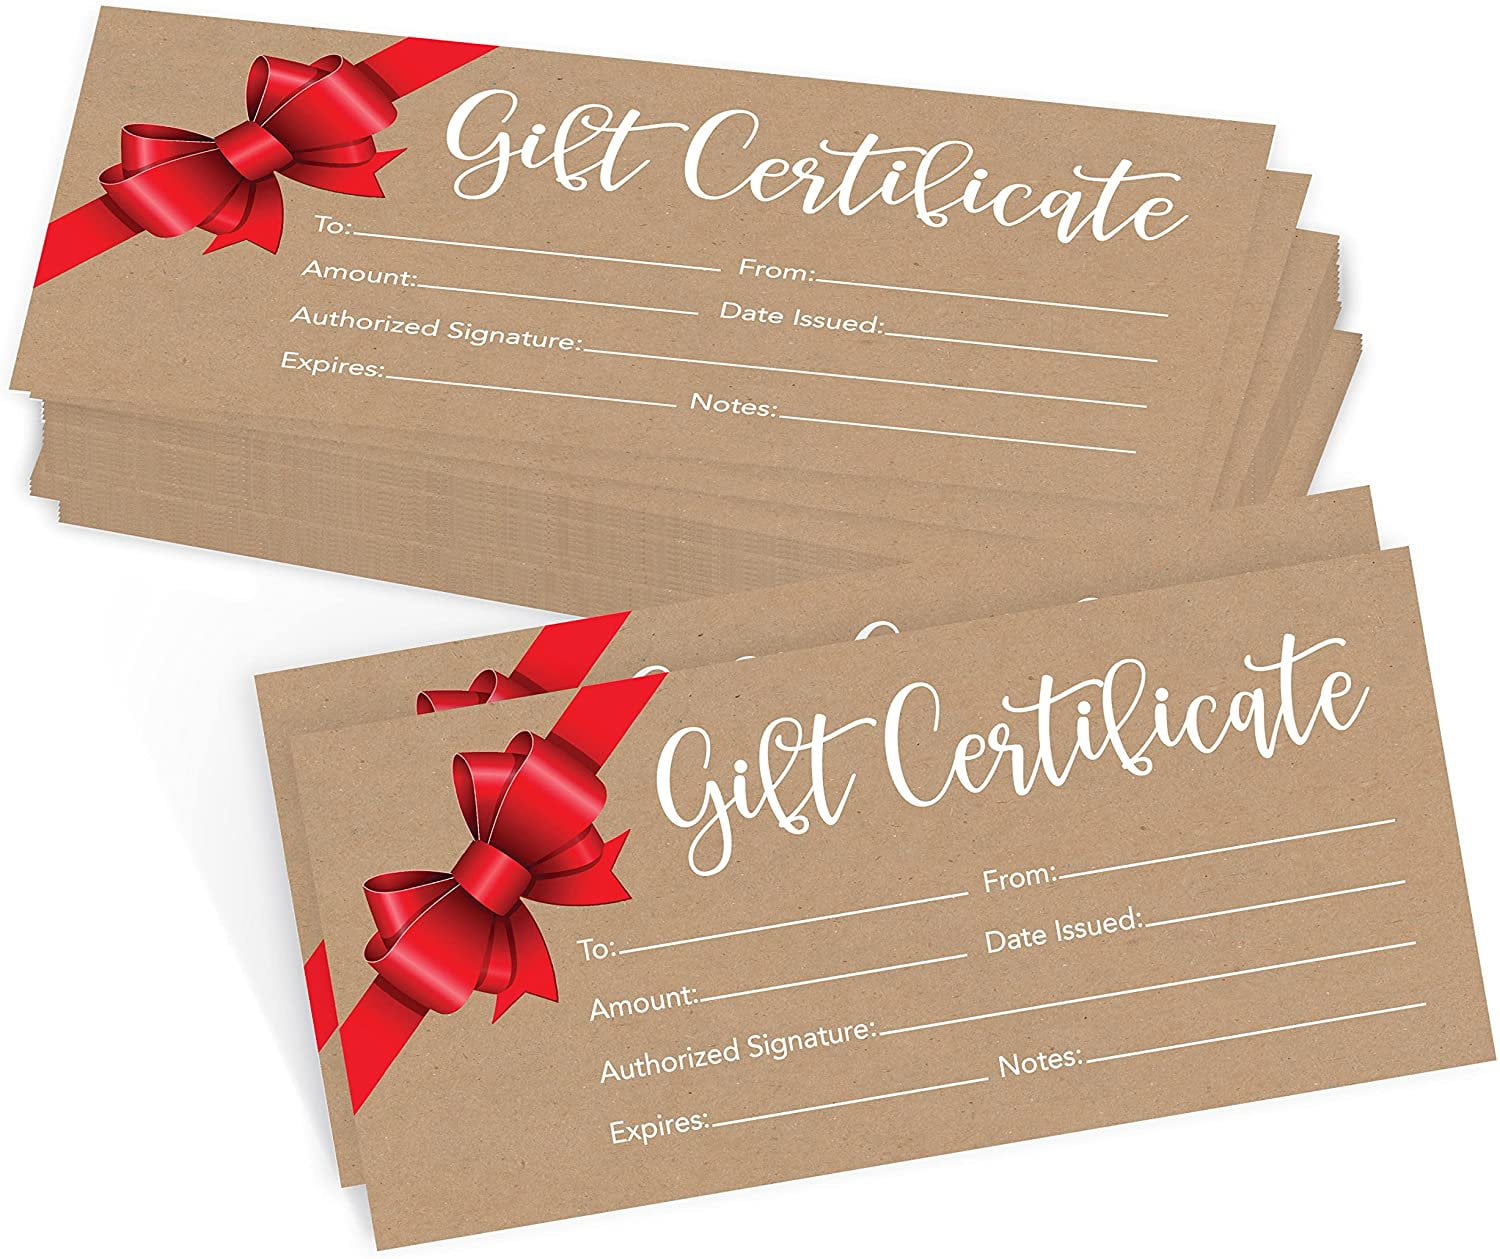 Paper Gift Certificates Blank Coupons 4X9 Inch Greenery Generic Gift Certificates Holiday Gift Cards Blank 25 Blank Gift Certificates for Business Supplies Blank Gift Cards for Spa Gift Vouchers 